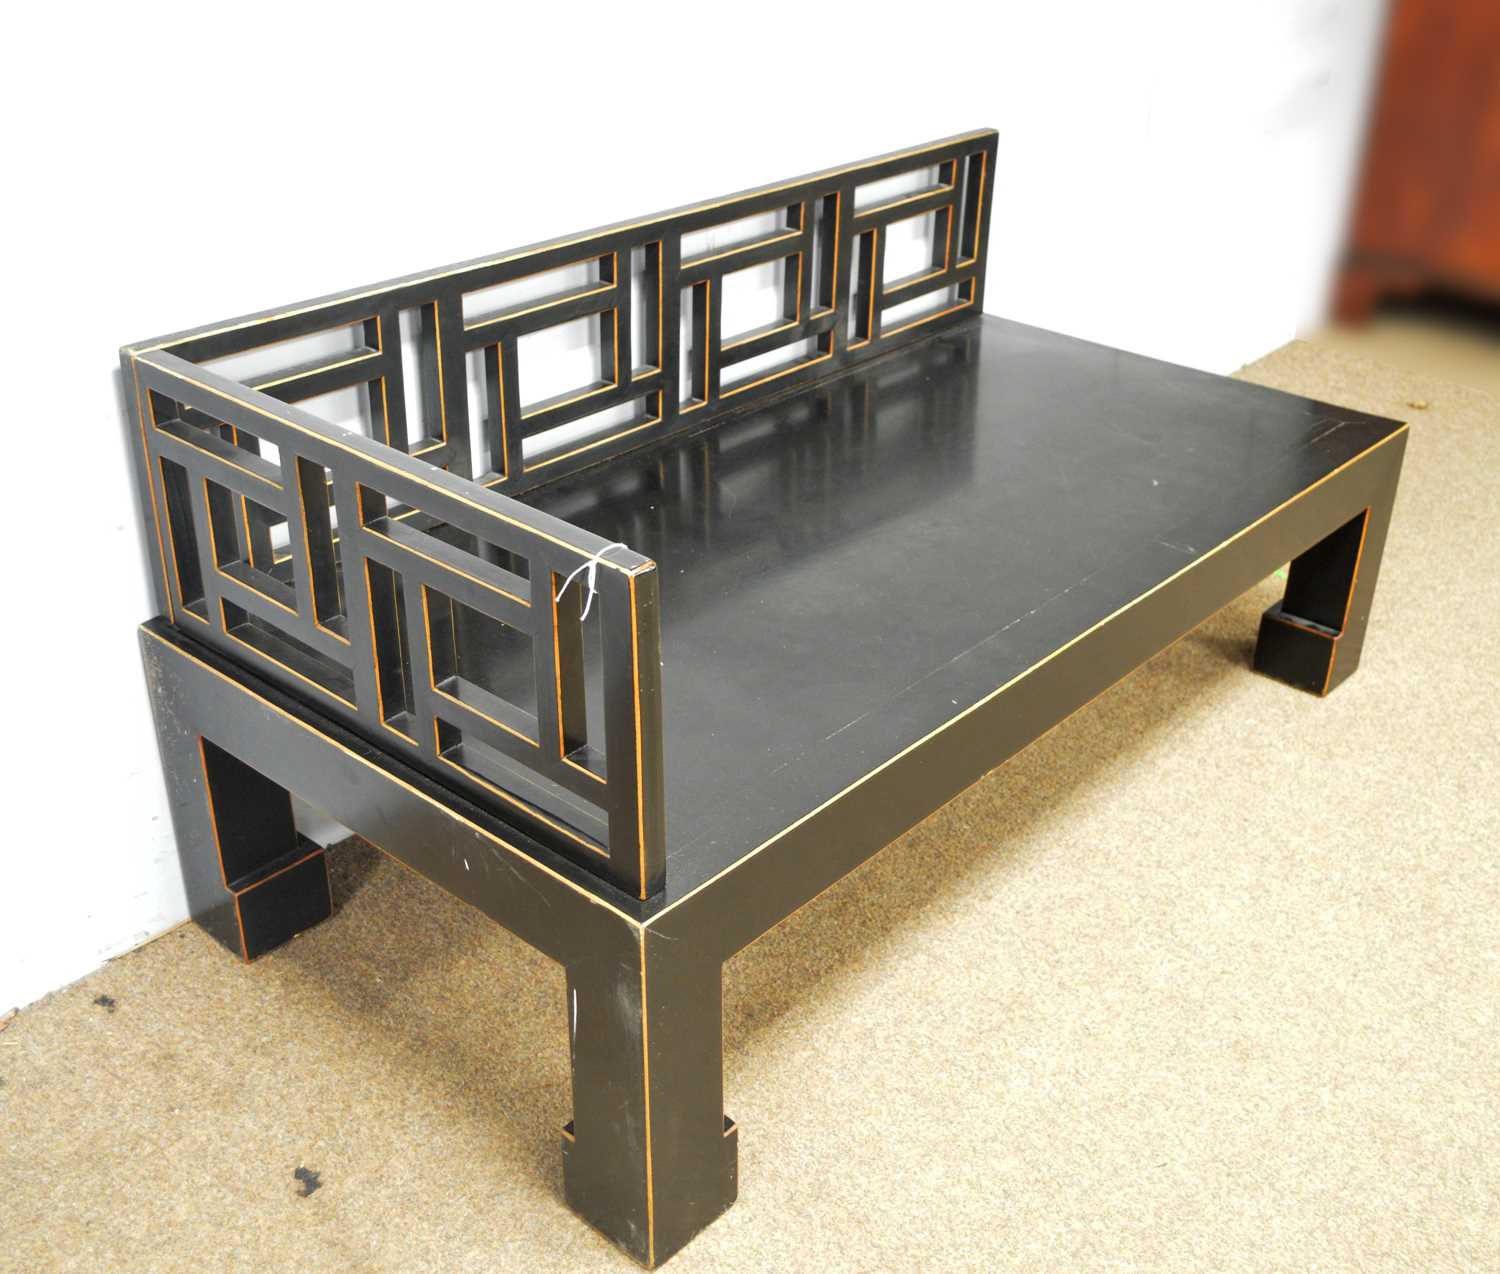 An Asian black lacquer and gold painted day bed - Image 2 of 4